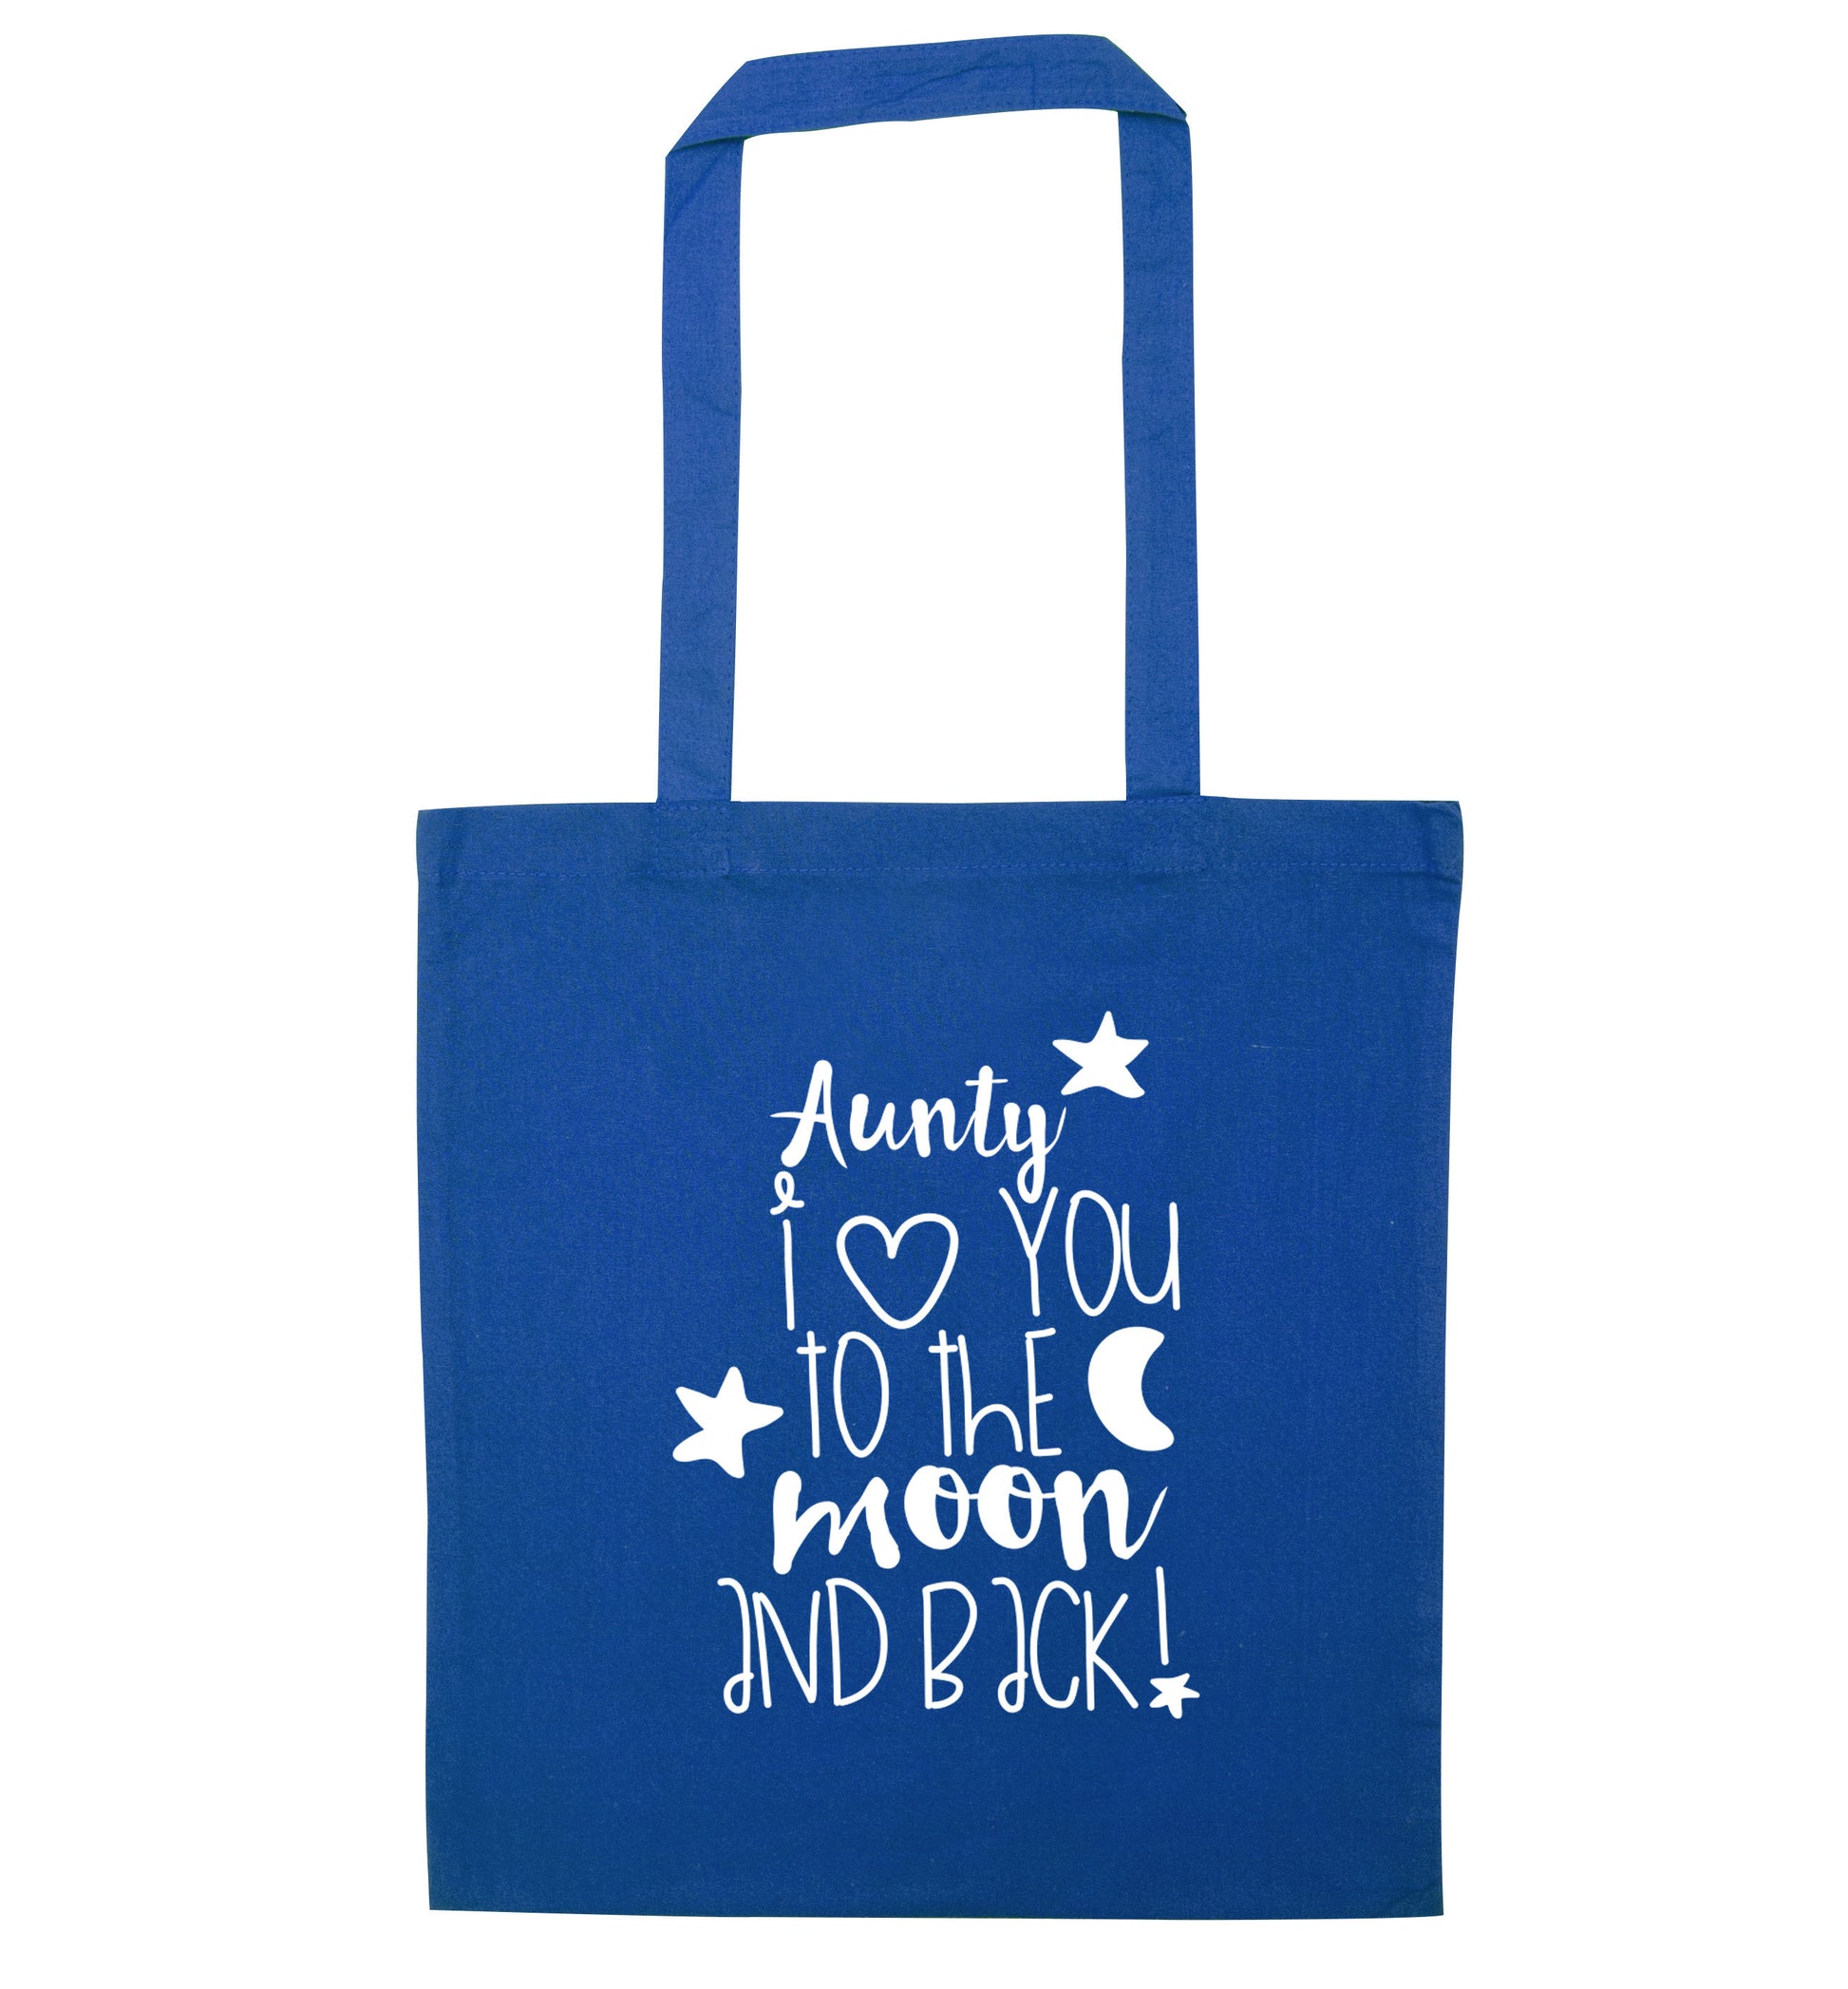 Aunty I love you to the moon and back blue tote bag